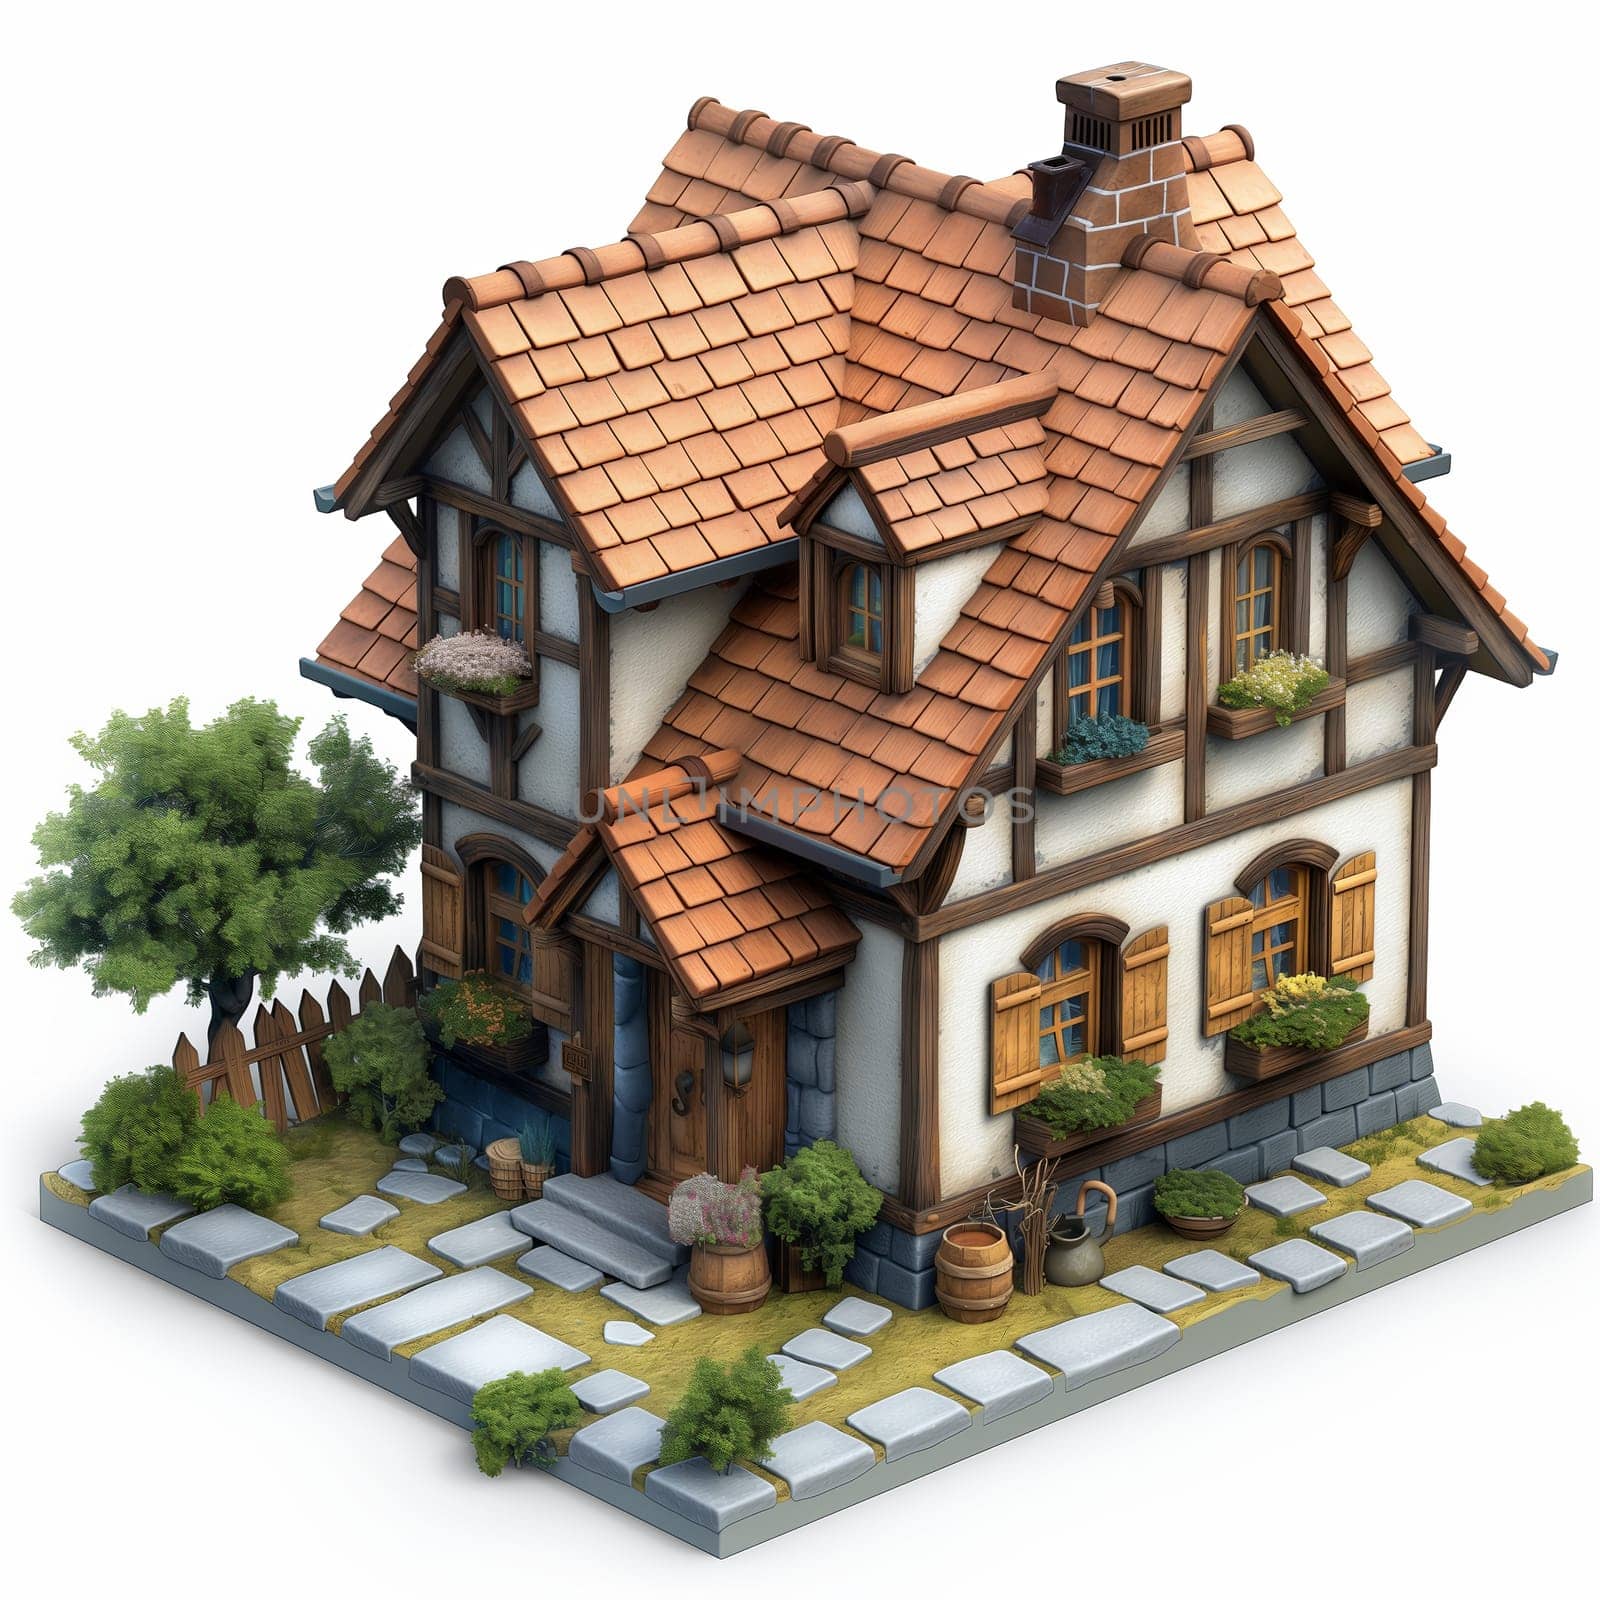 Detailed 3D model of a house with a complex wooden frame. by Fischeron